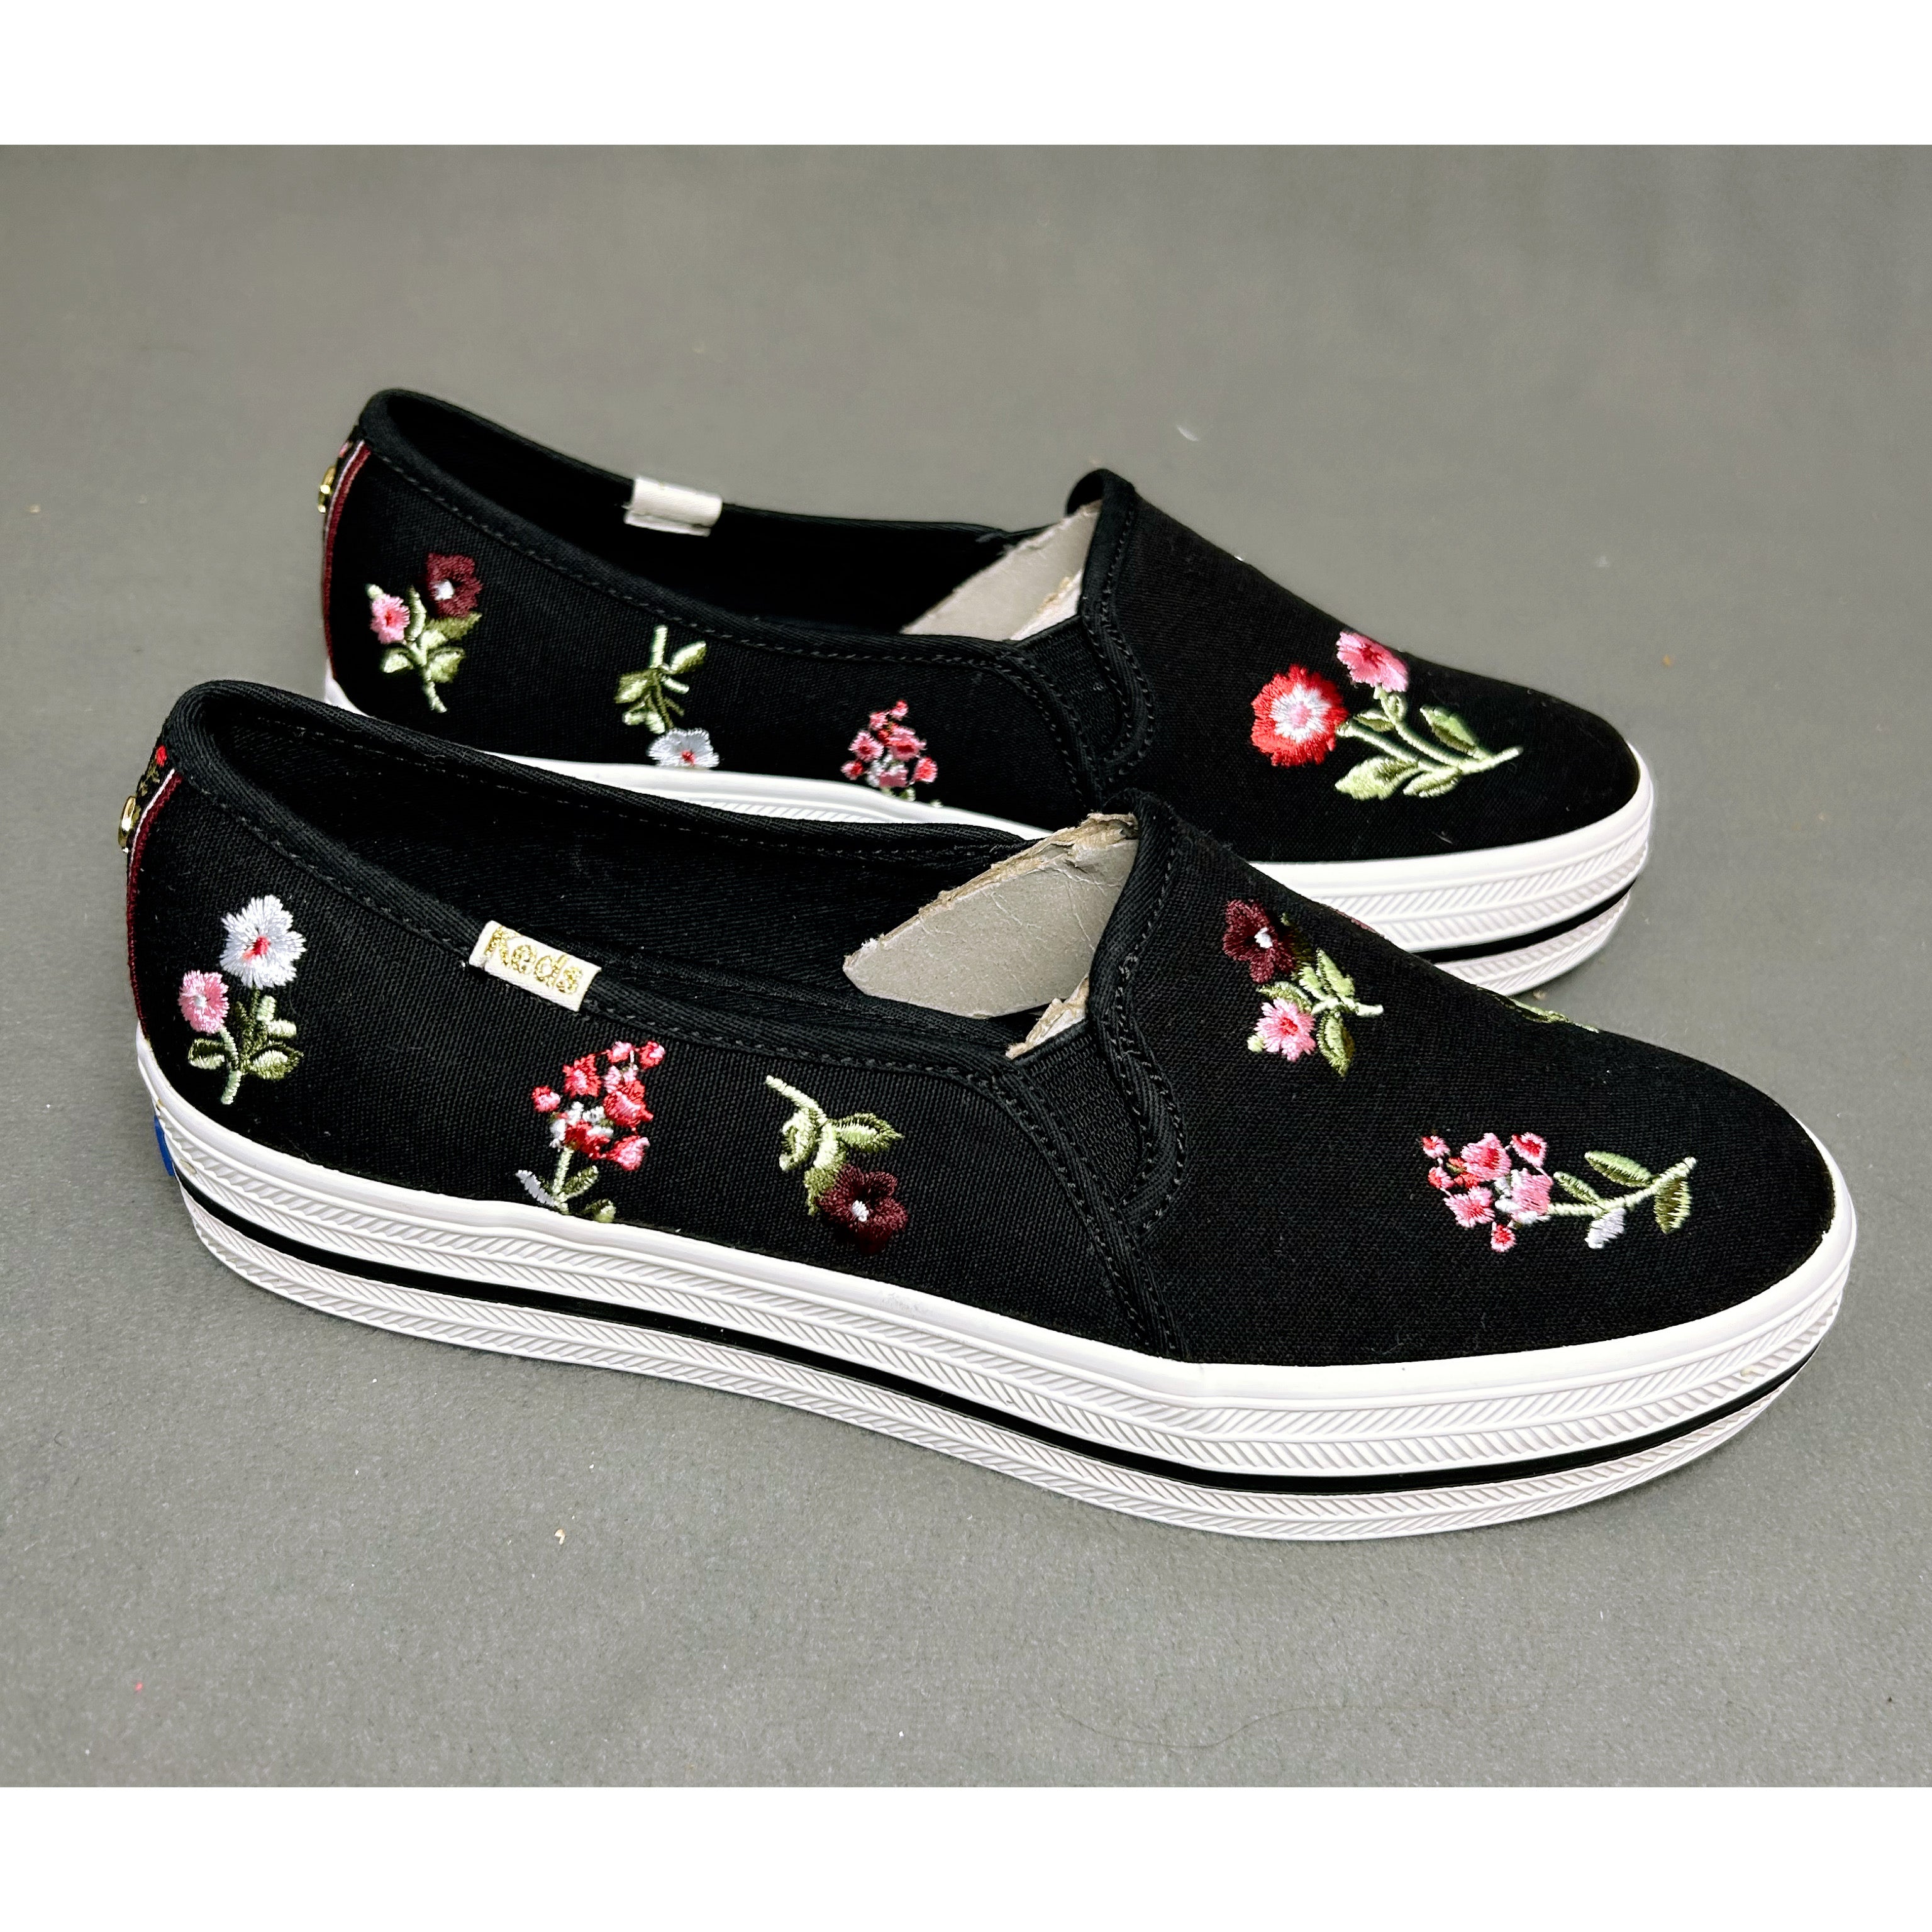 Keds black floral Triple Deck sneakers, size 7.5, NEW IN BOX!